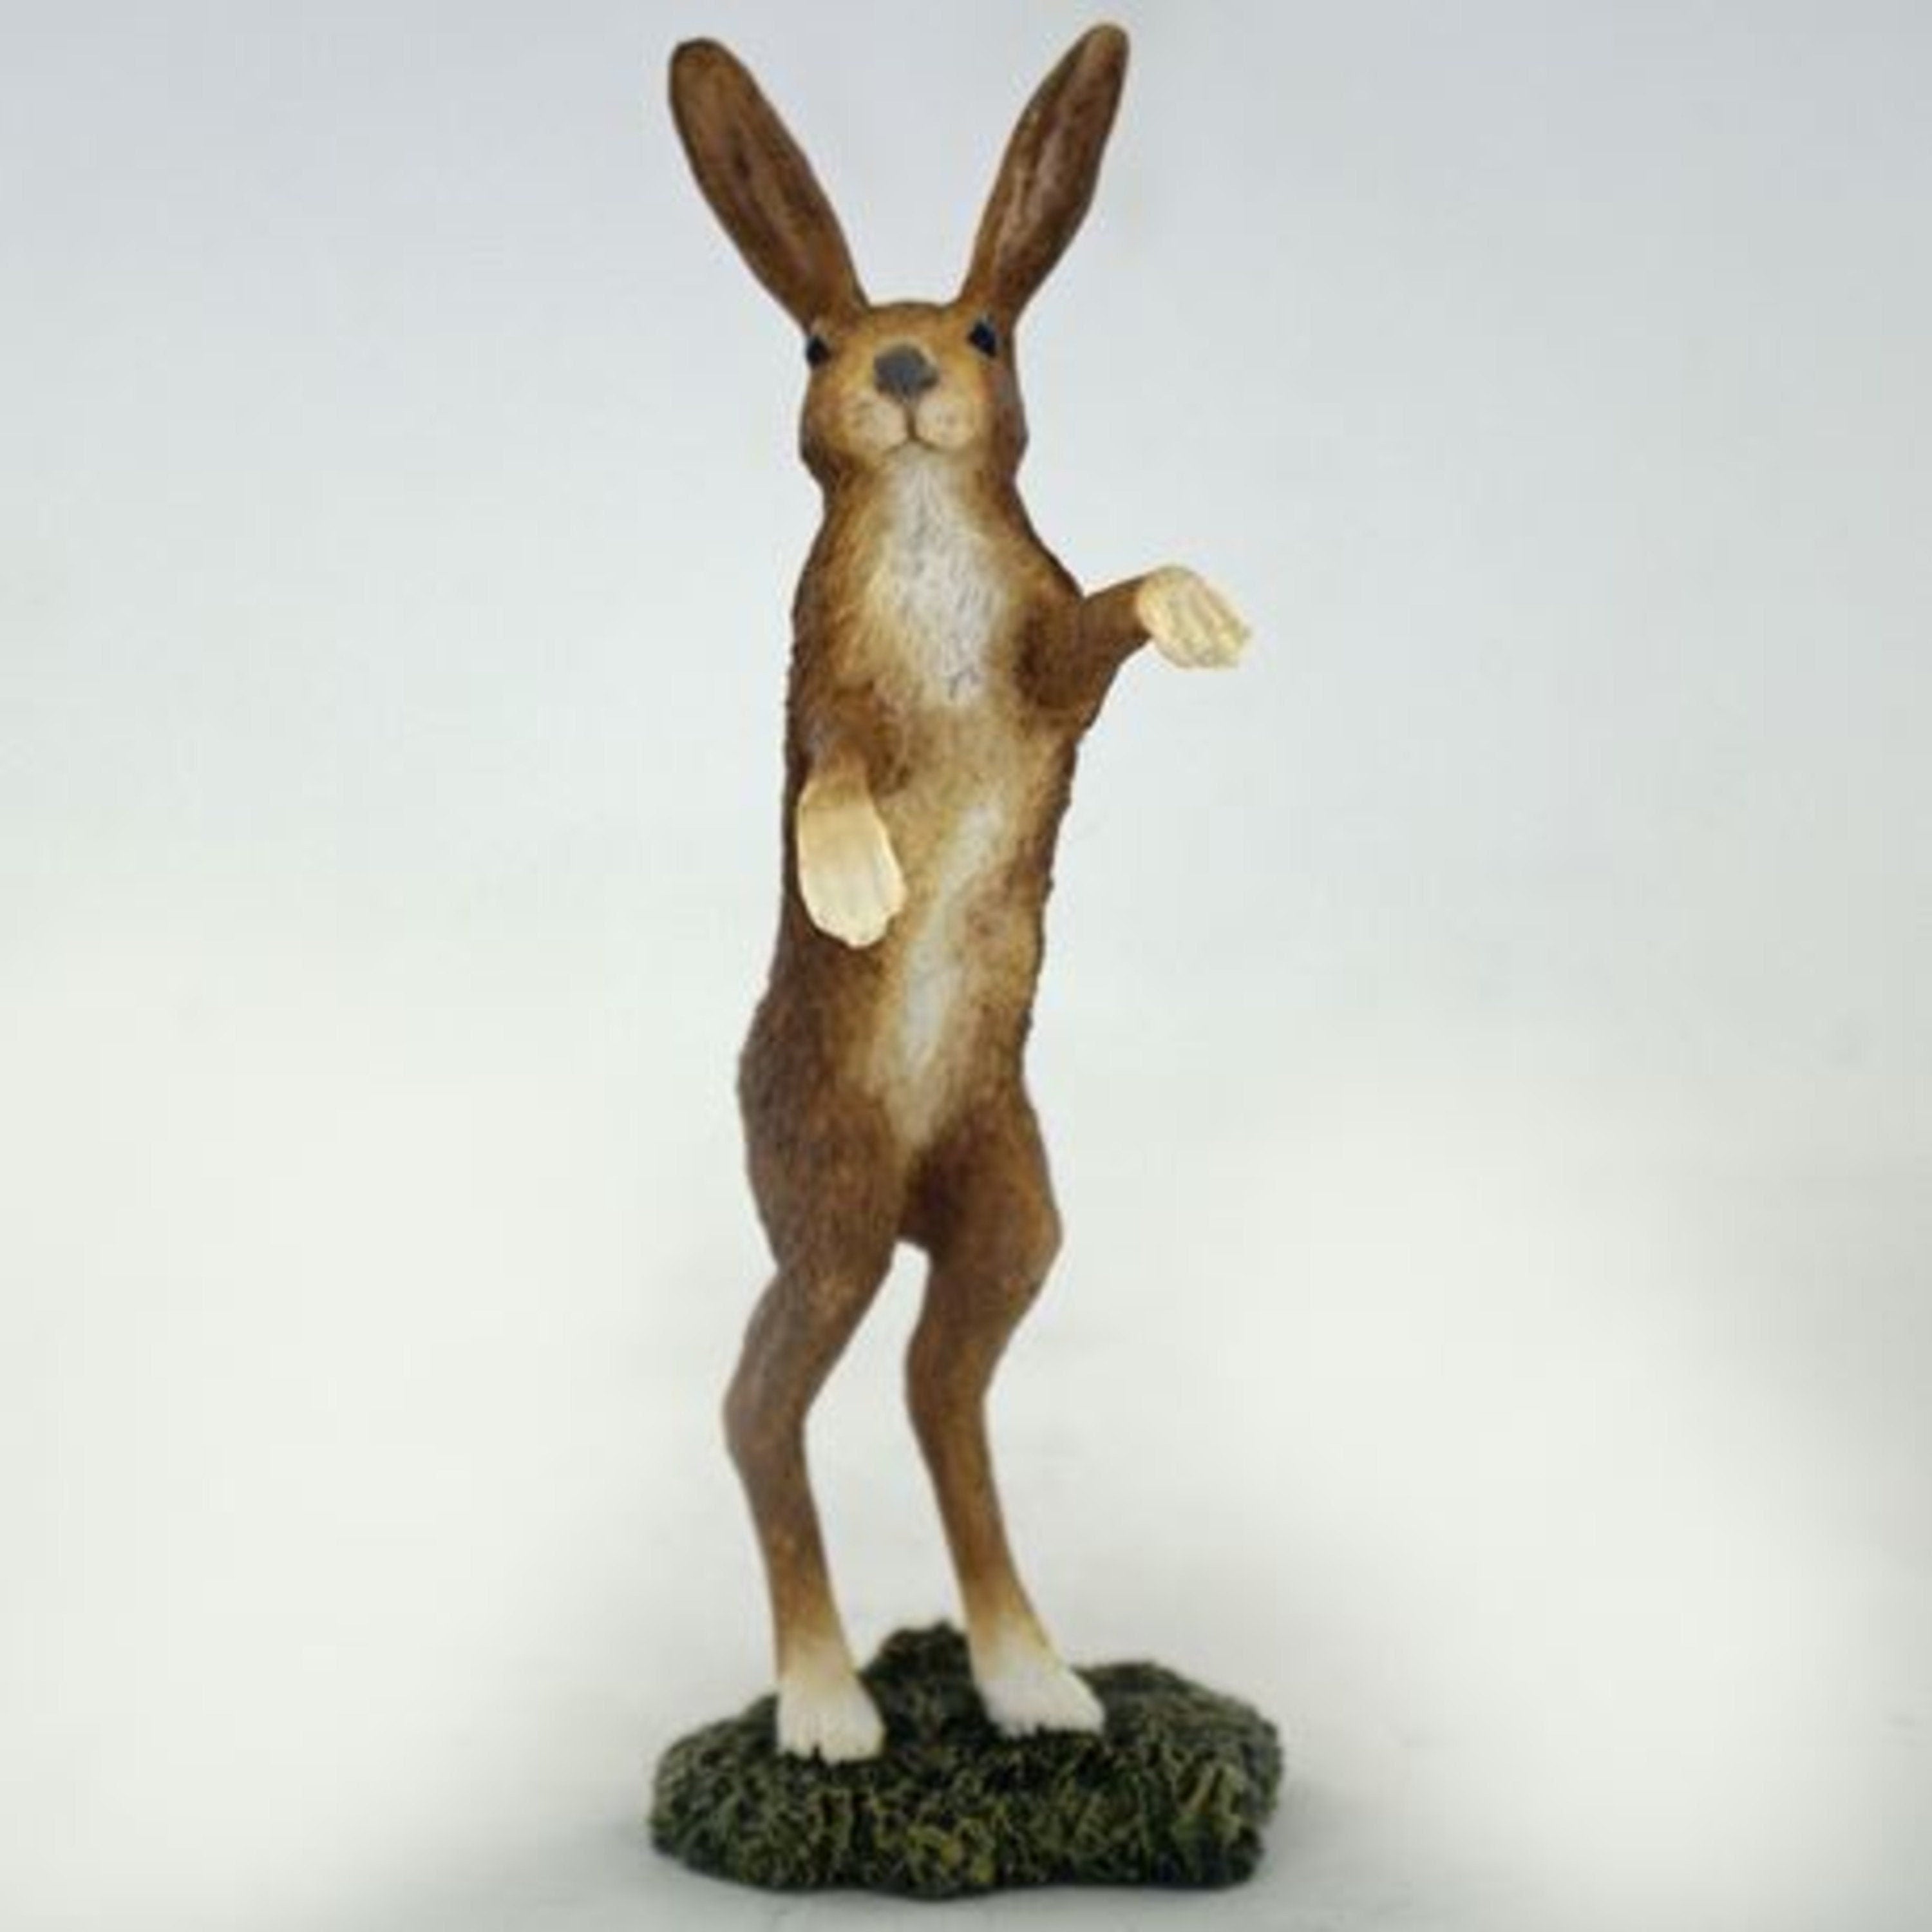 Funny BOXING HARE Ornament Home Decor Easter Gift